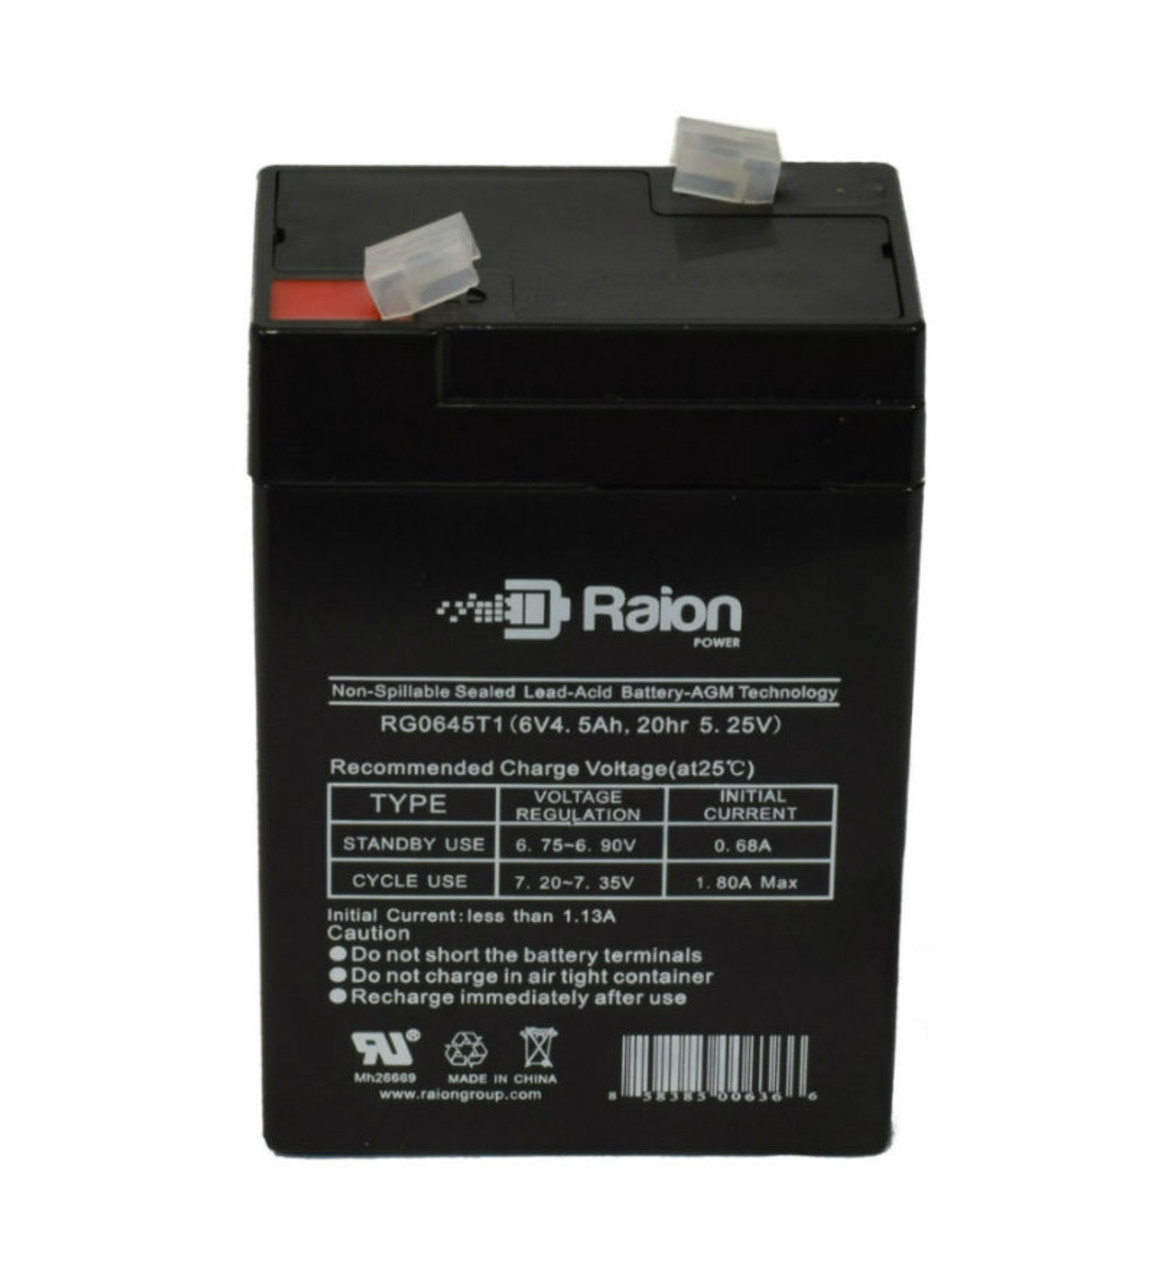 Raion Power RG0645T1 Replacement Battery Cartridge for Portalac GS PE6V4.5F1